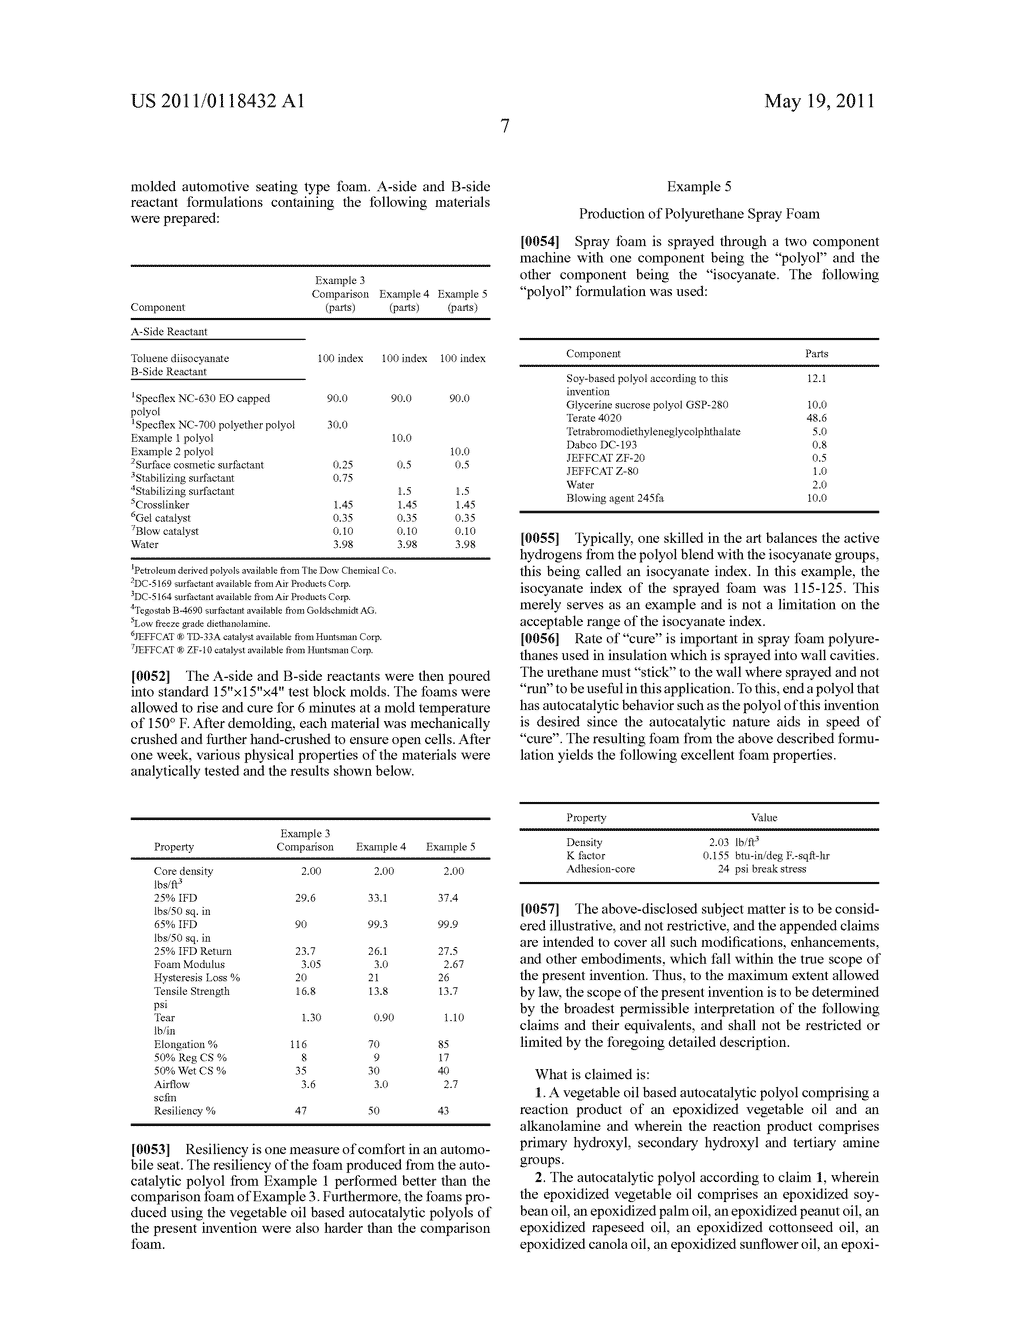 NATURAL OIL BASED AUTOCATALYTIC POLYOLS - diagram, schematic, and image 09